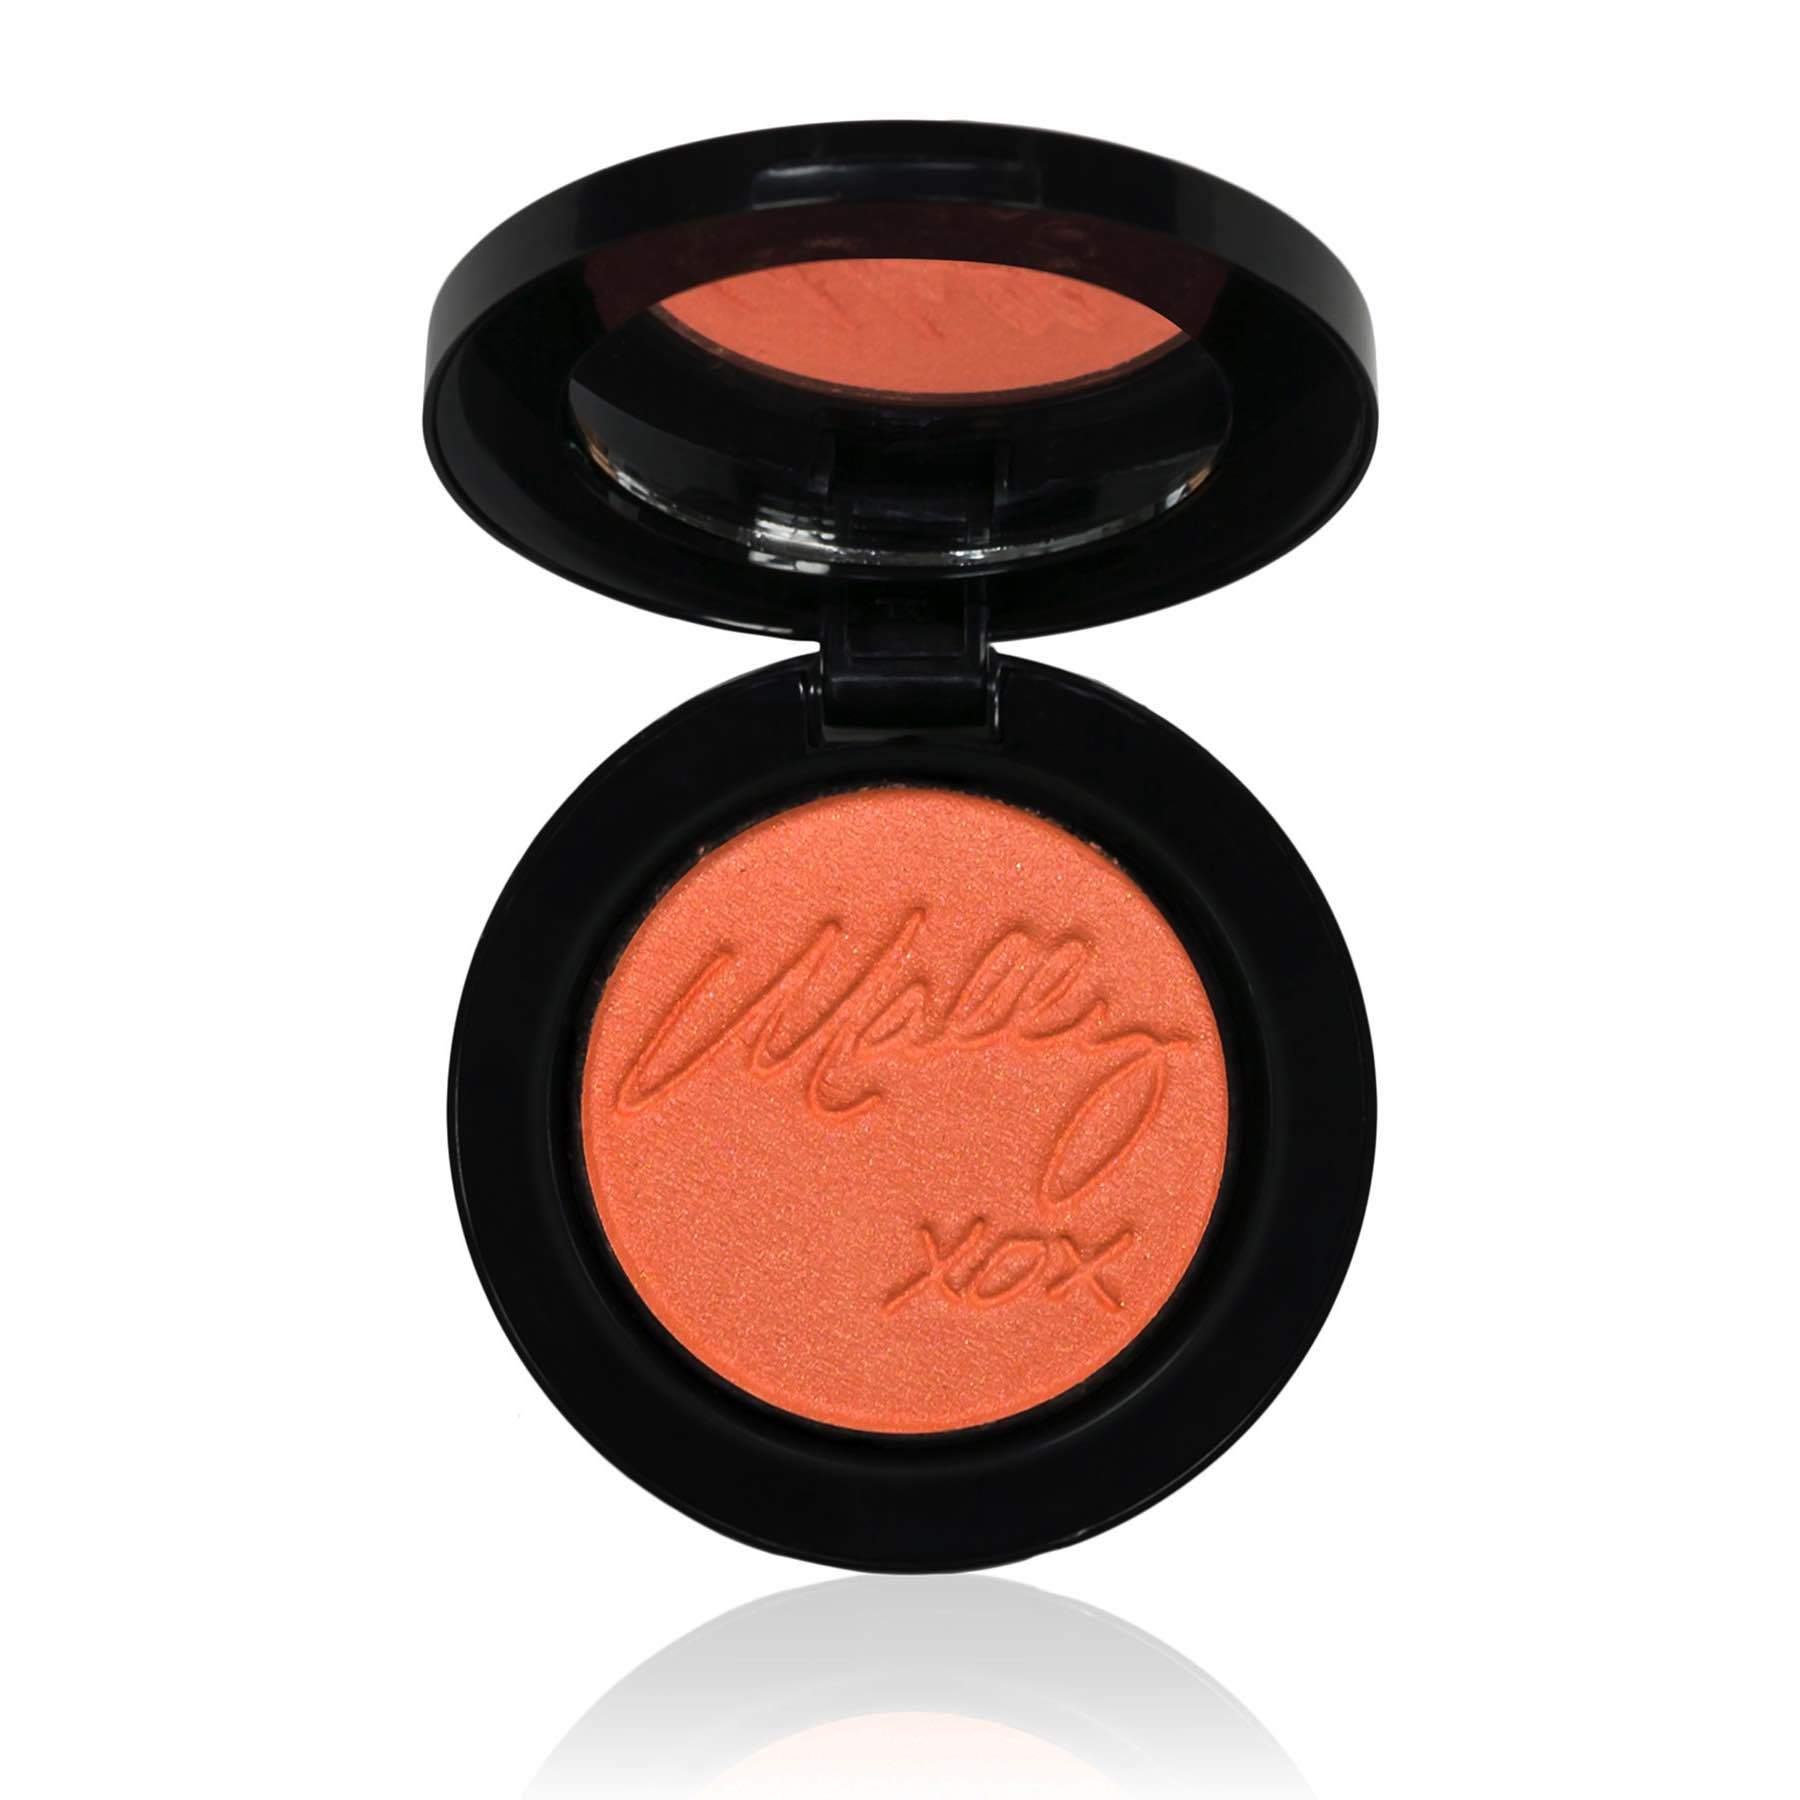 MALLY Effortlessly Airbrushed Blush Perfect Peach Travel